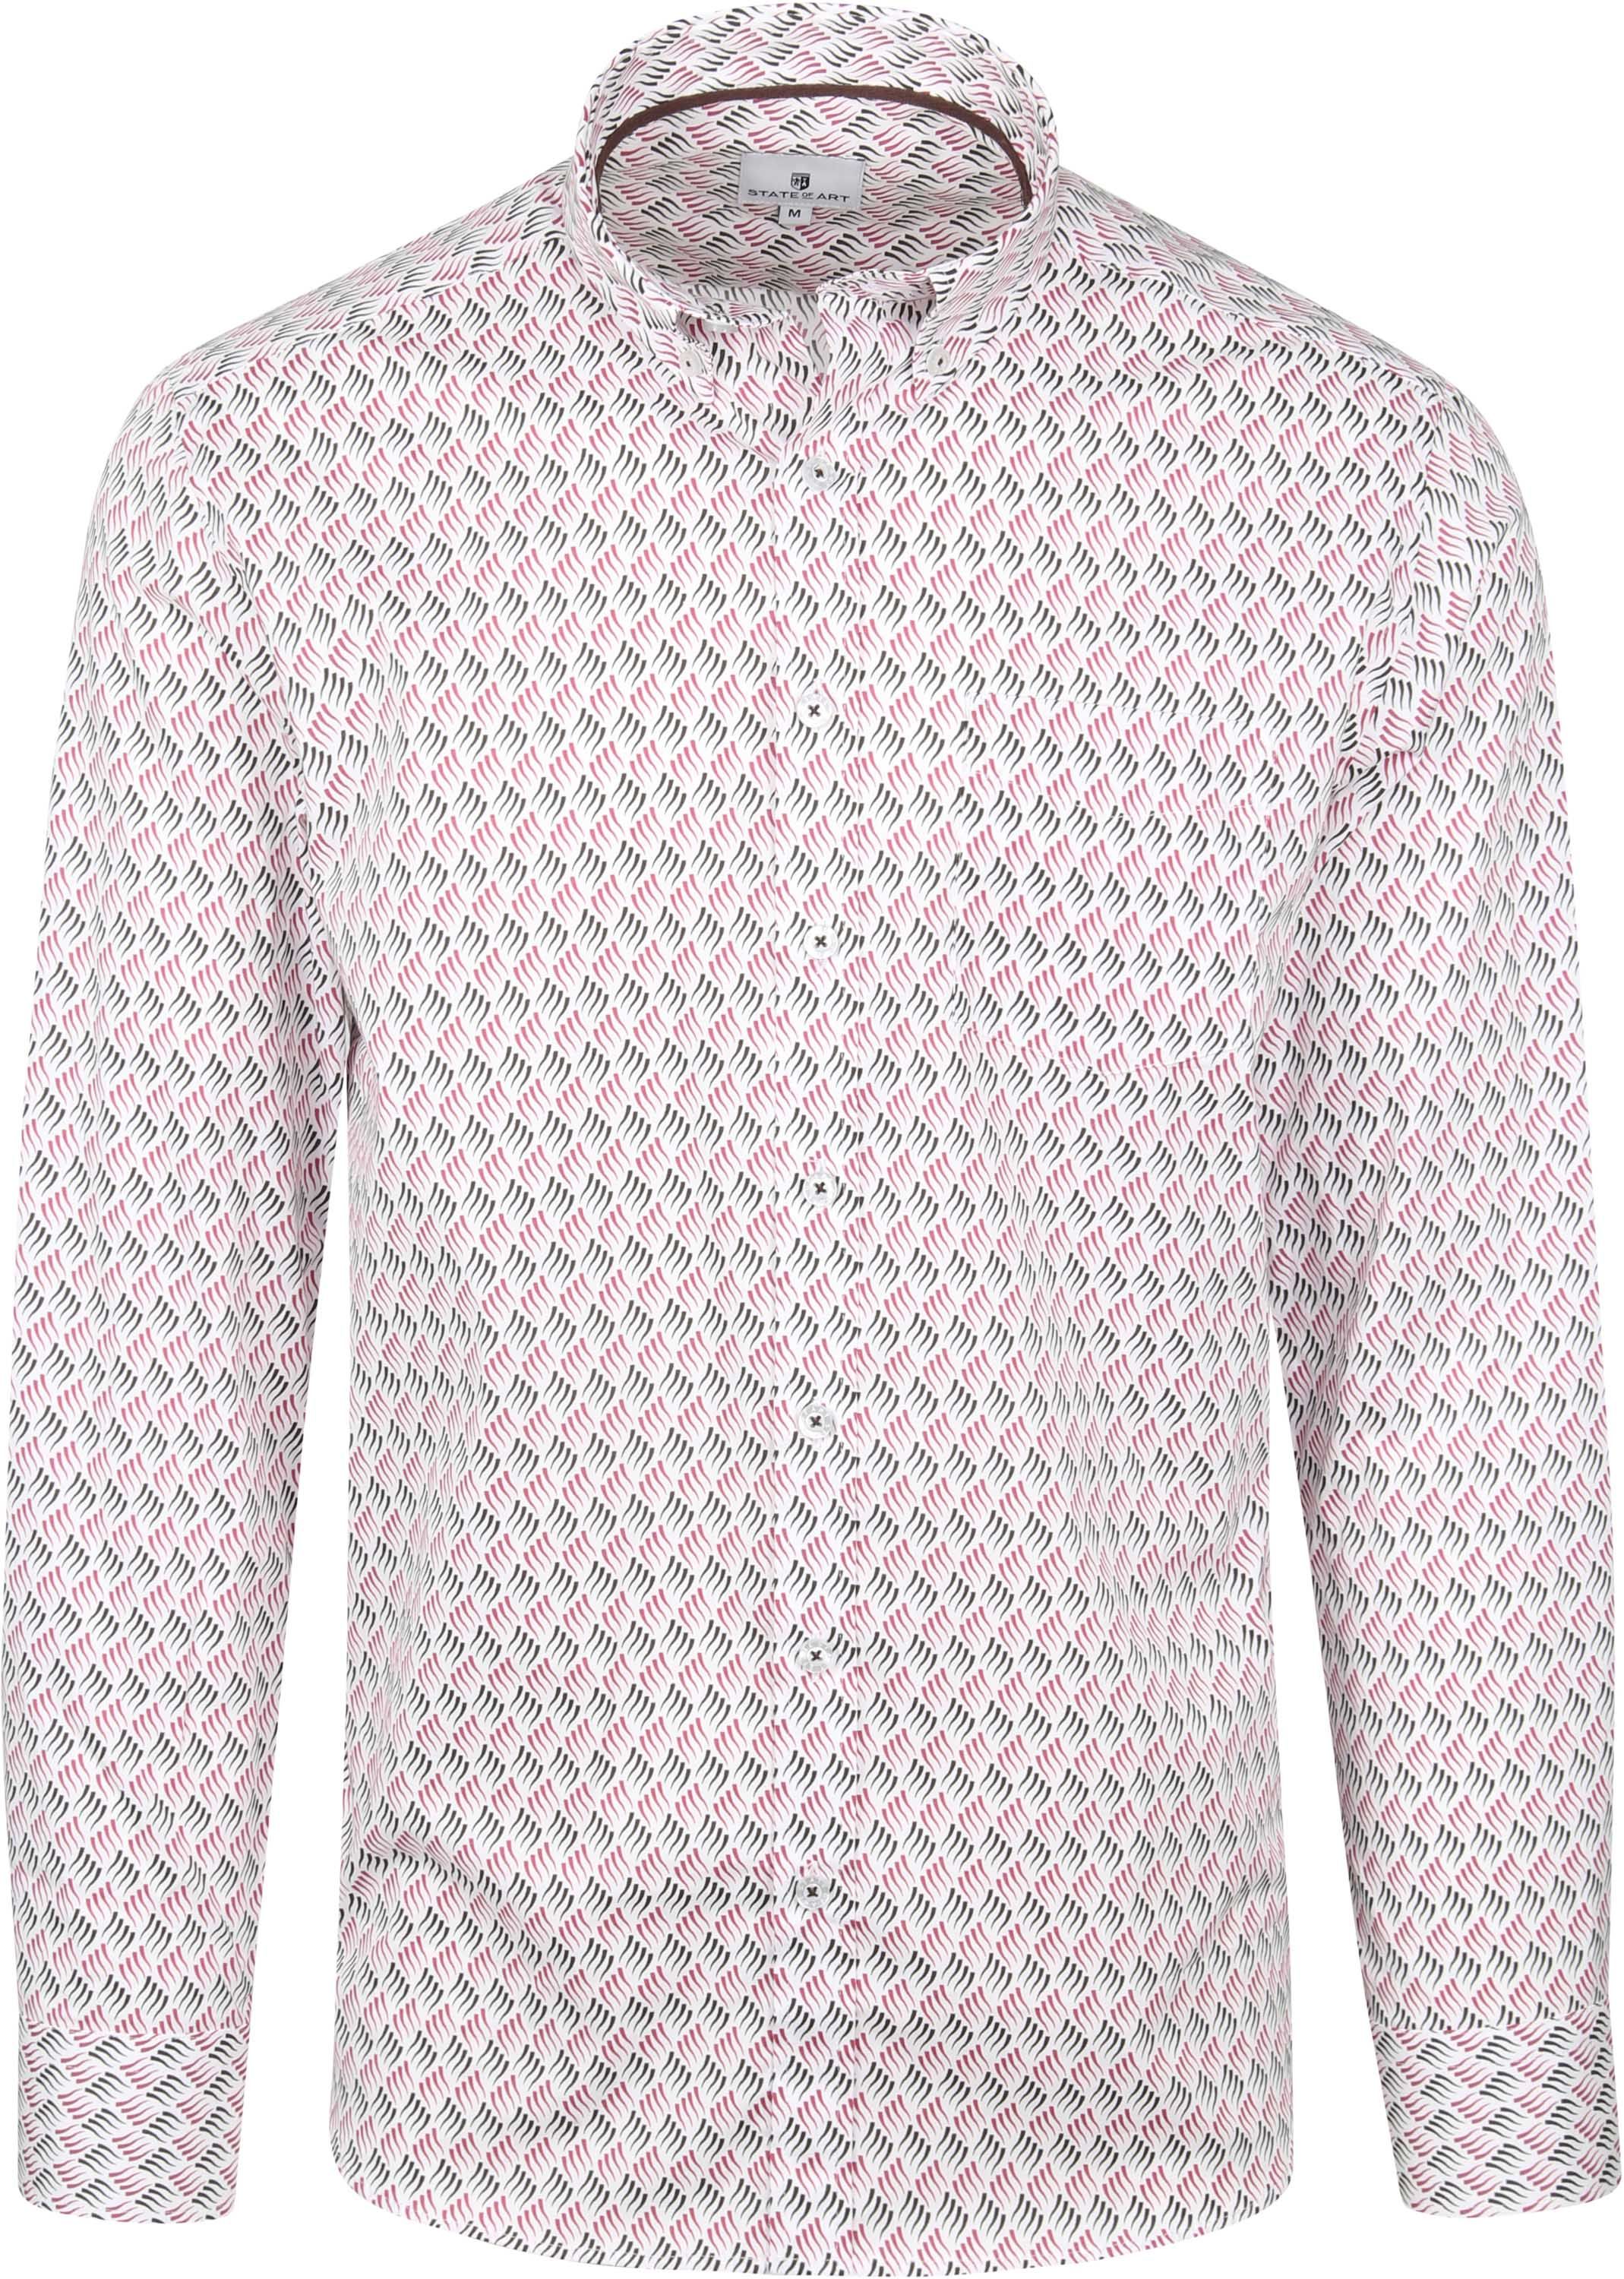 State Of Art Shirt Print Pink Multicolour size 3XL